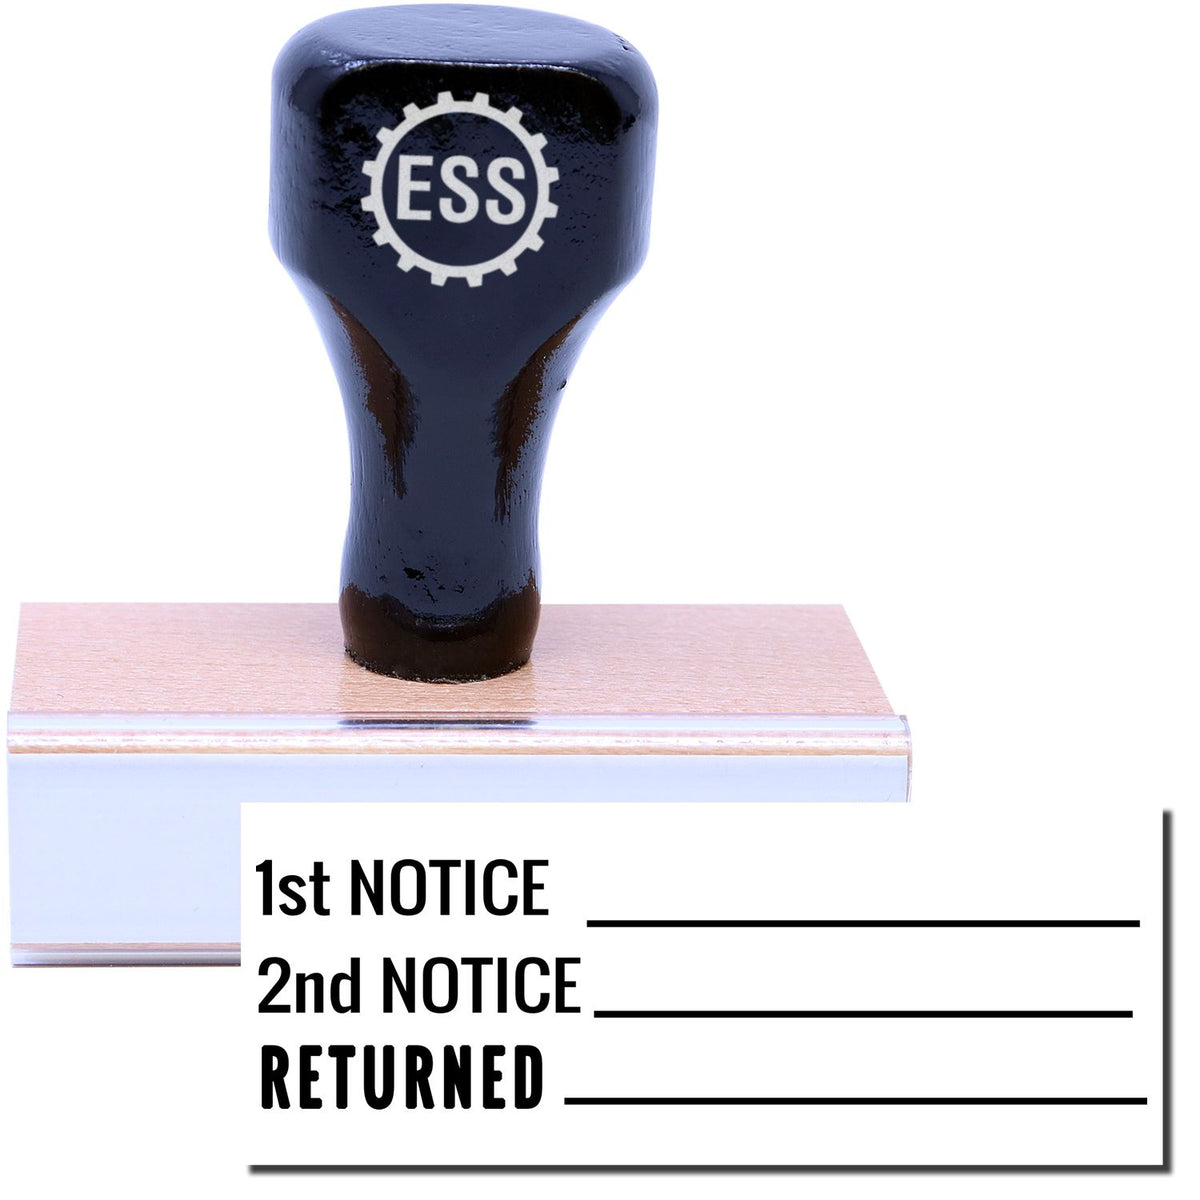 A stock office rubber stamp with a stamped image showing how the texts &quot;1st NOTICE&quot;, &quot;2nd NOTICE&quot;, and &quot;RETURNED&quot; in a large font with a line after each text is displayed after stamping.